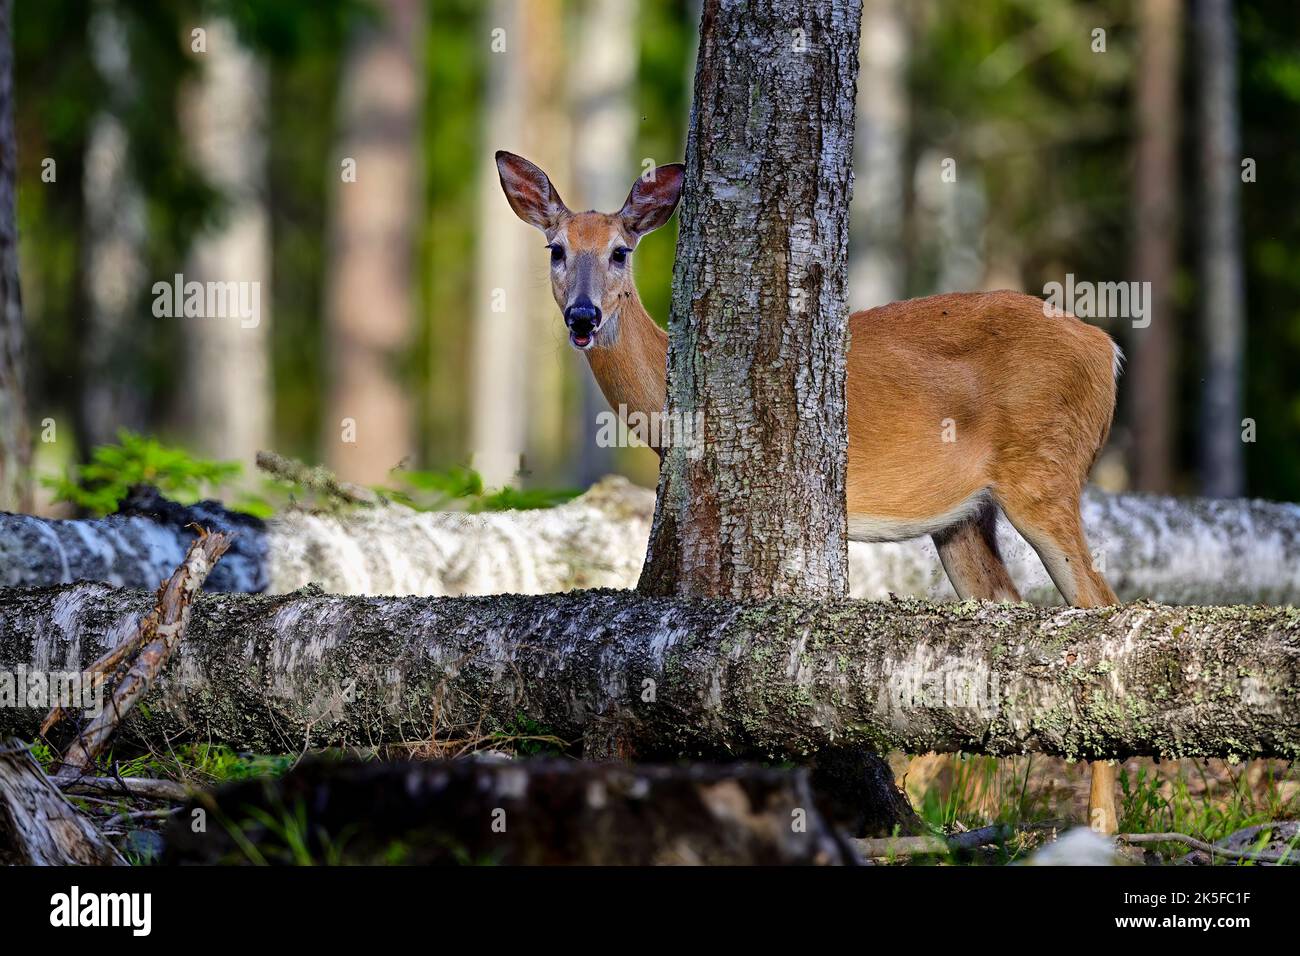 White-tailed deer in the forest at dusk. Stock Photo